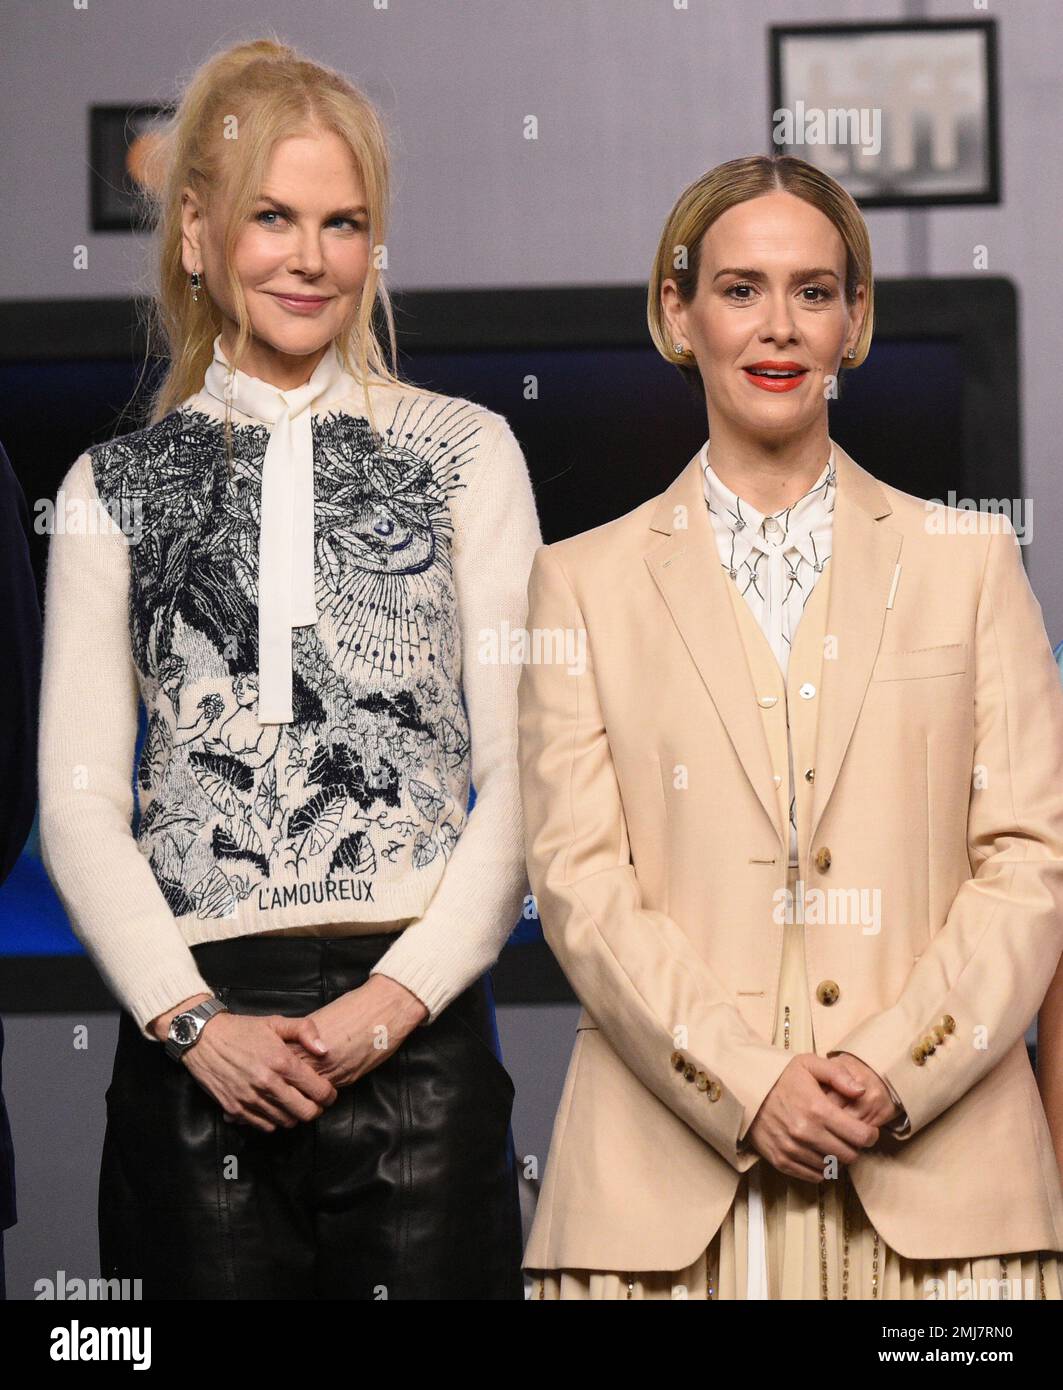 Nicole Kidman The Goldfinch Press Conference at Toronto Film Festival  September 8, 2019 – Star Style